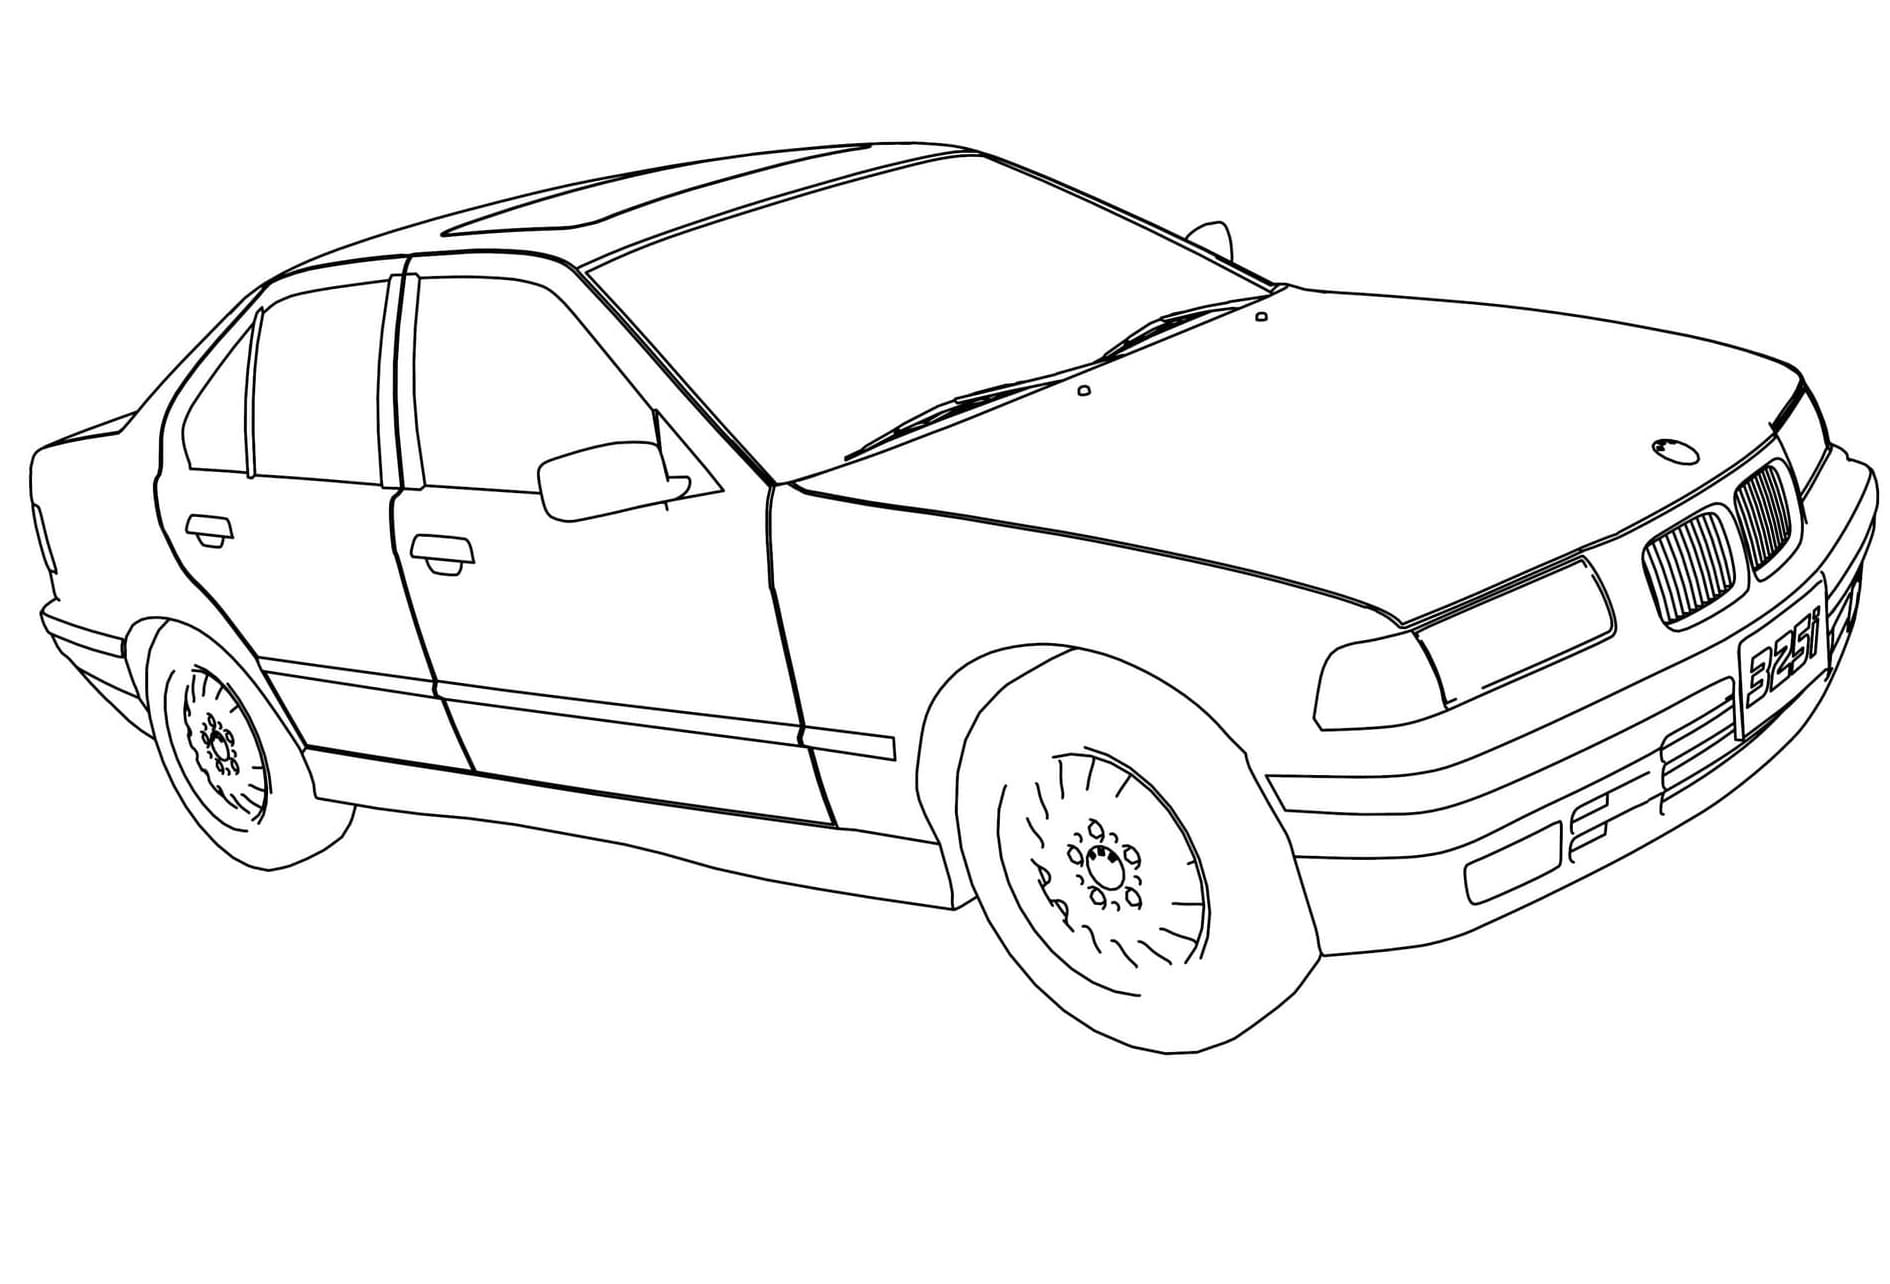 Voiture BMW 325i coloring page